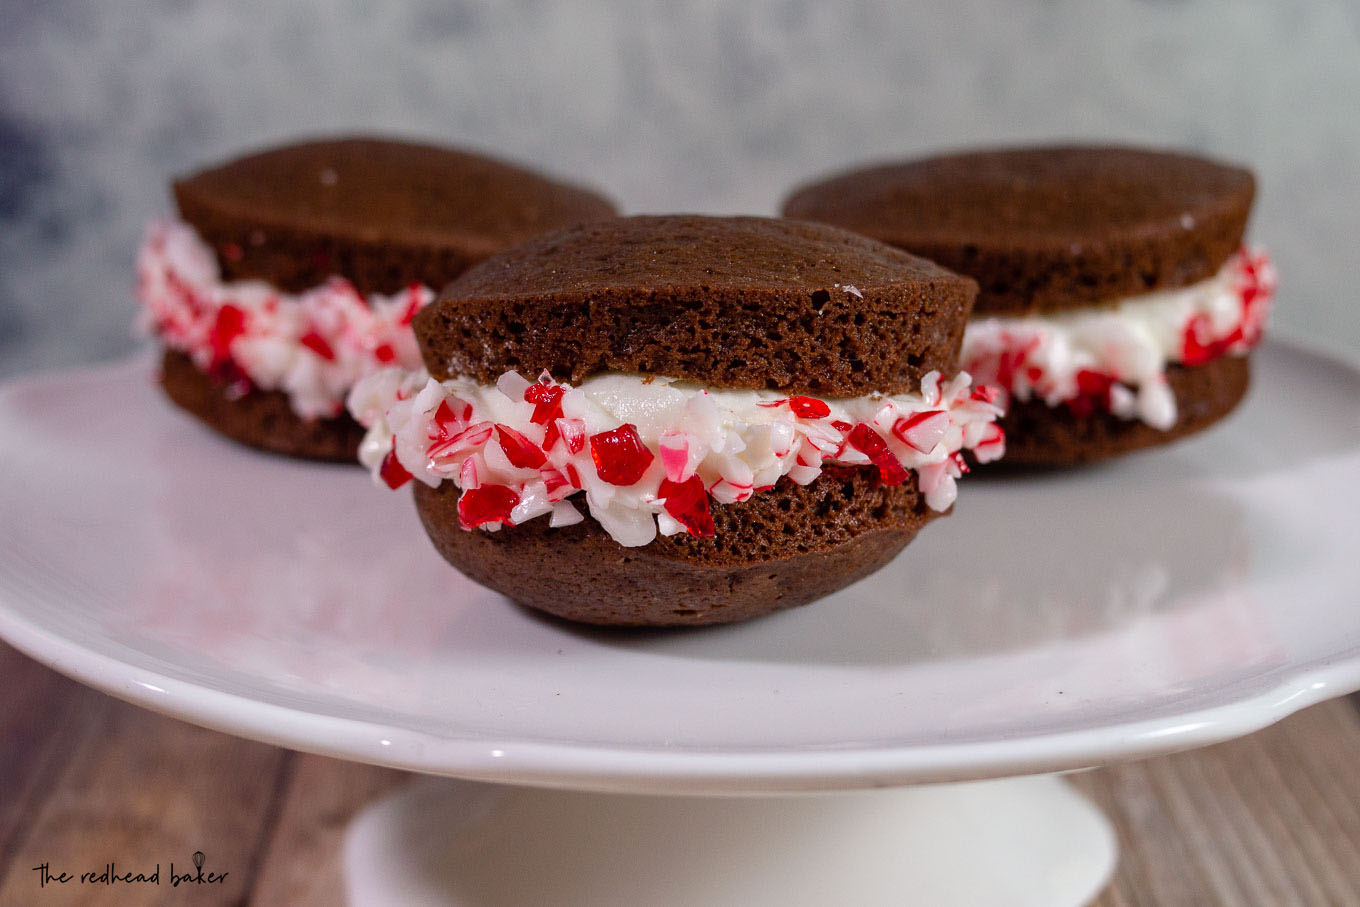 Three chocolate peppermint whoopie pies on a white cake plate